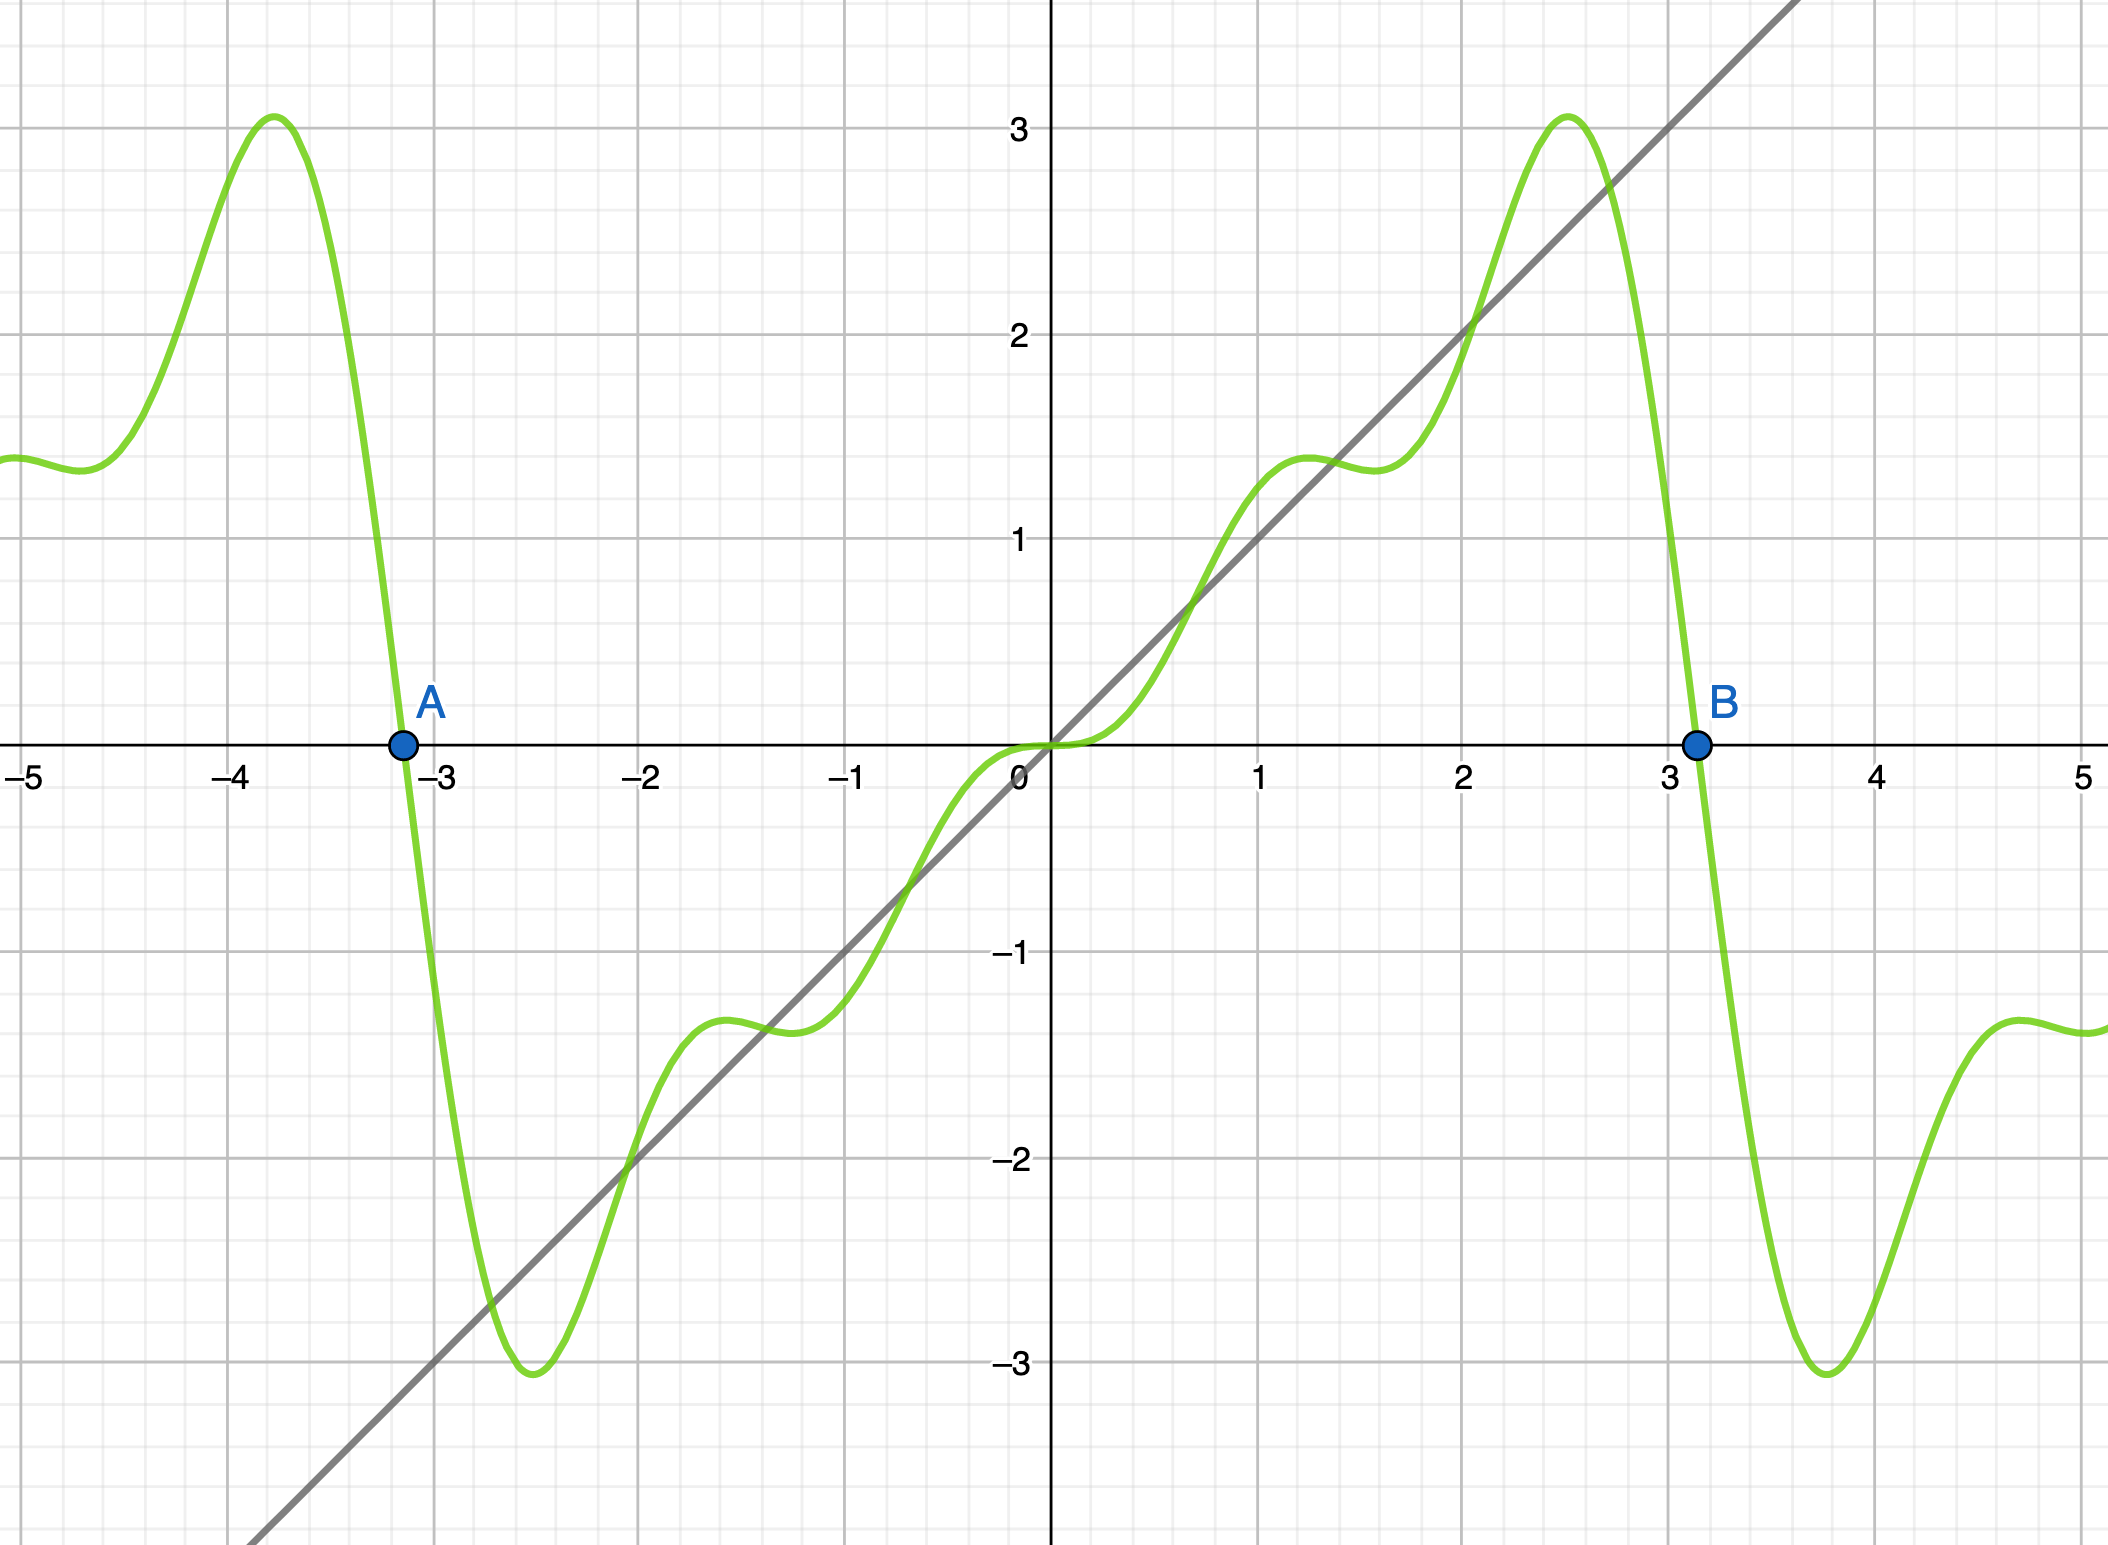 fourier series